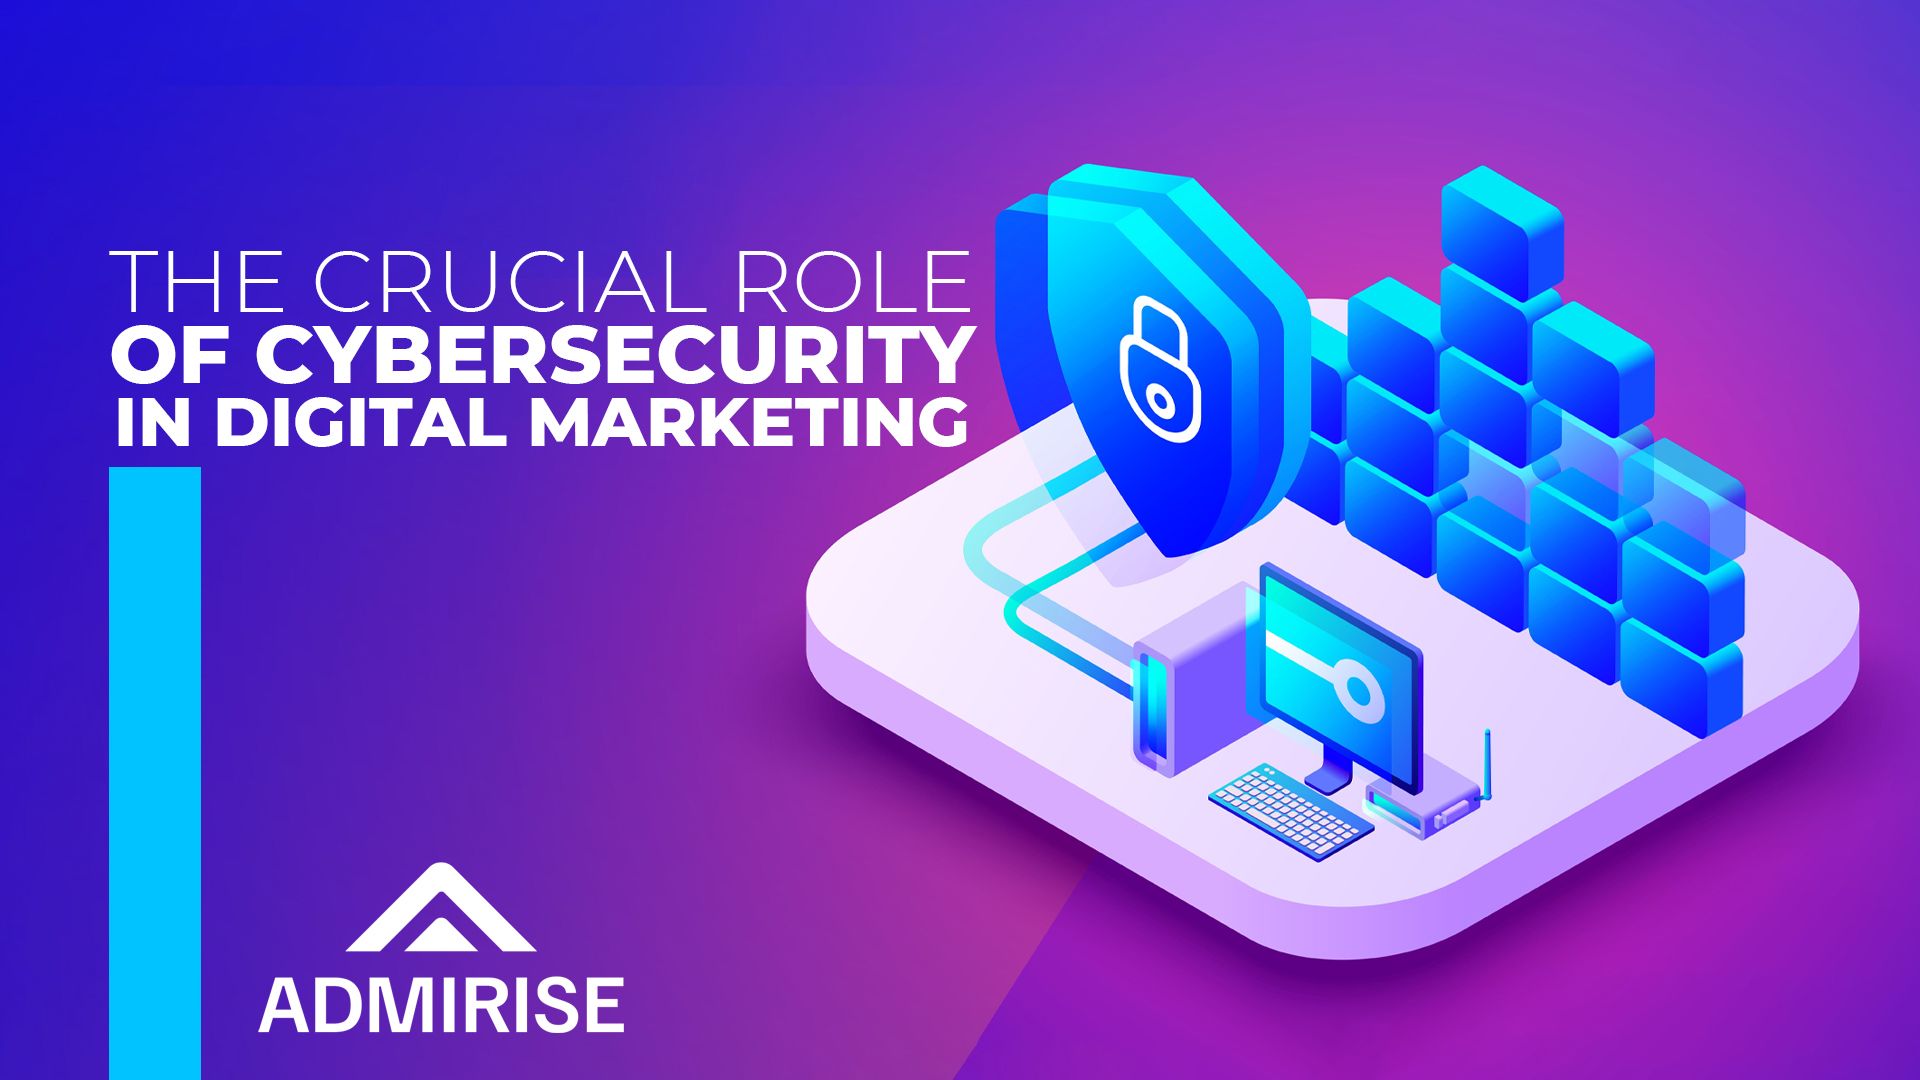 The Crucial Role of Cybersecurity in Digital Marketing